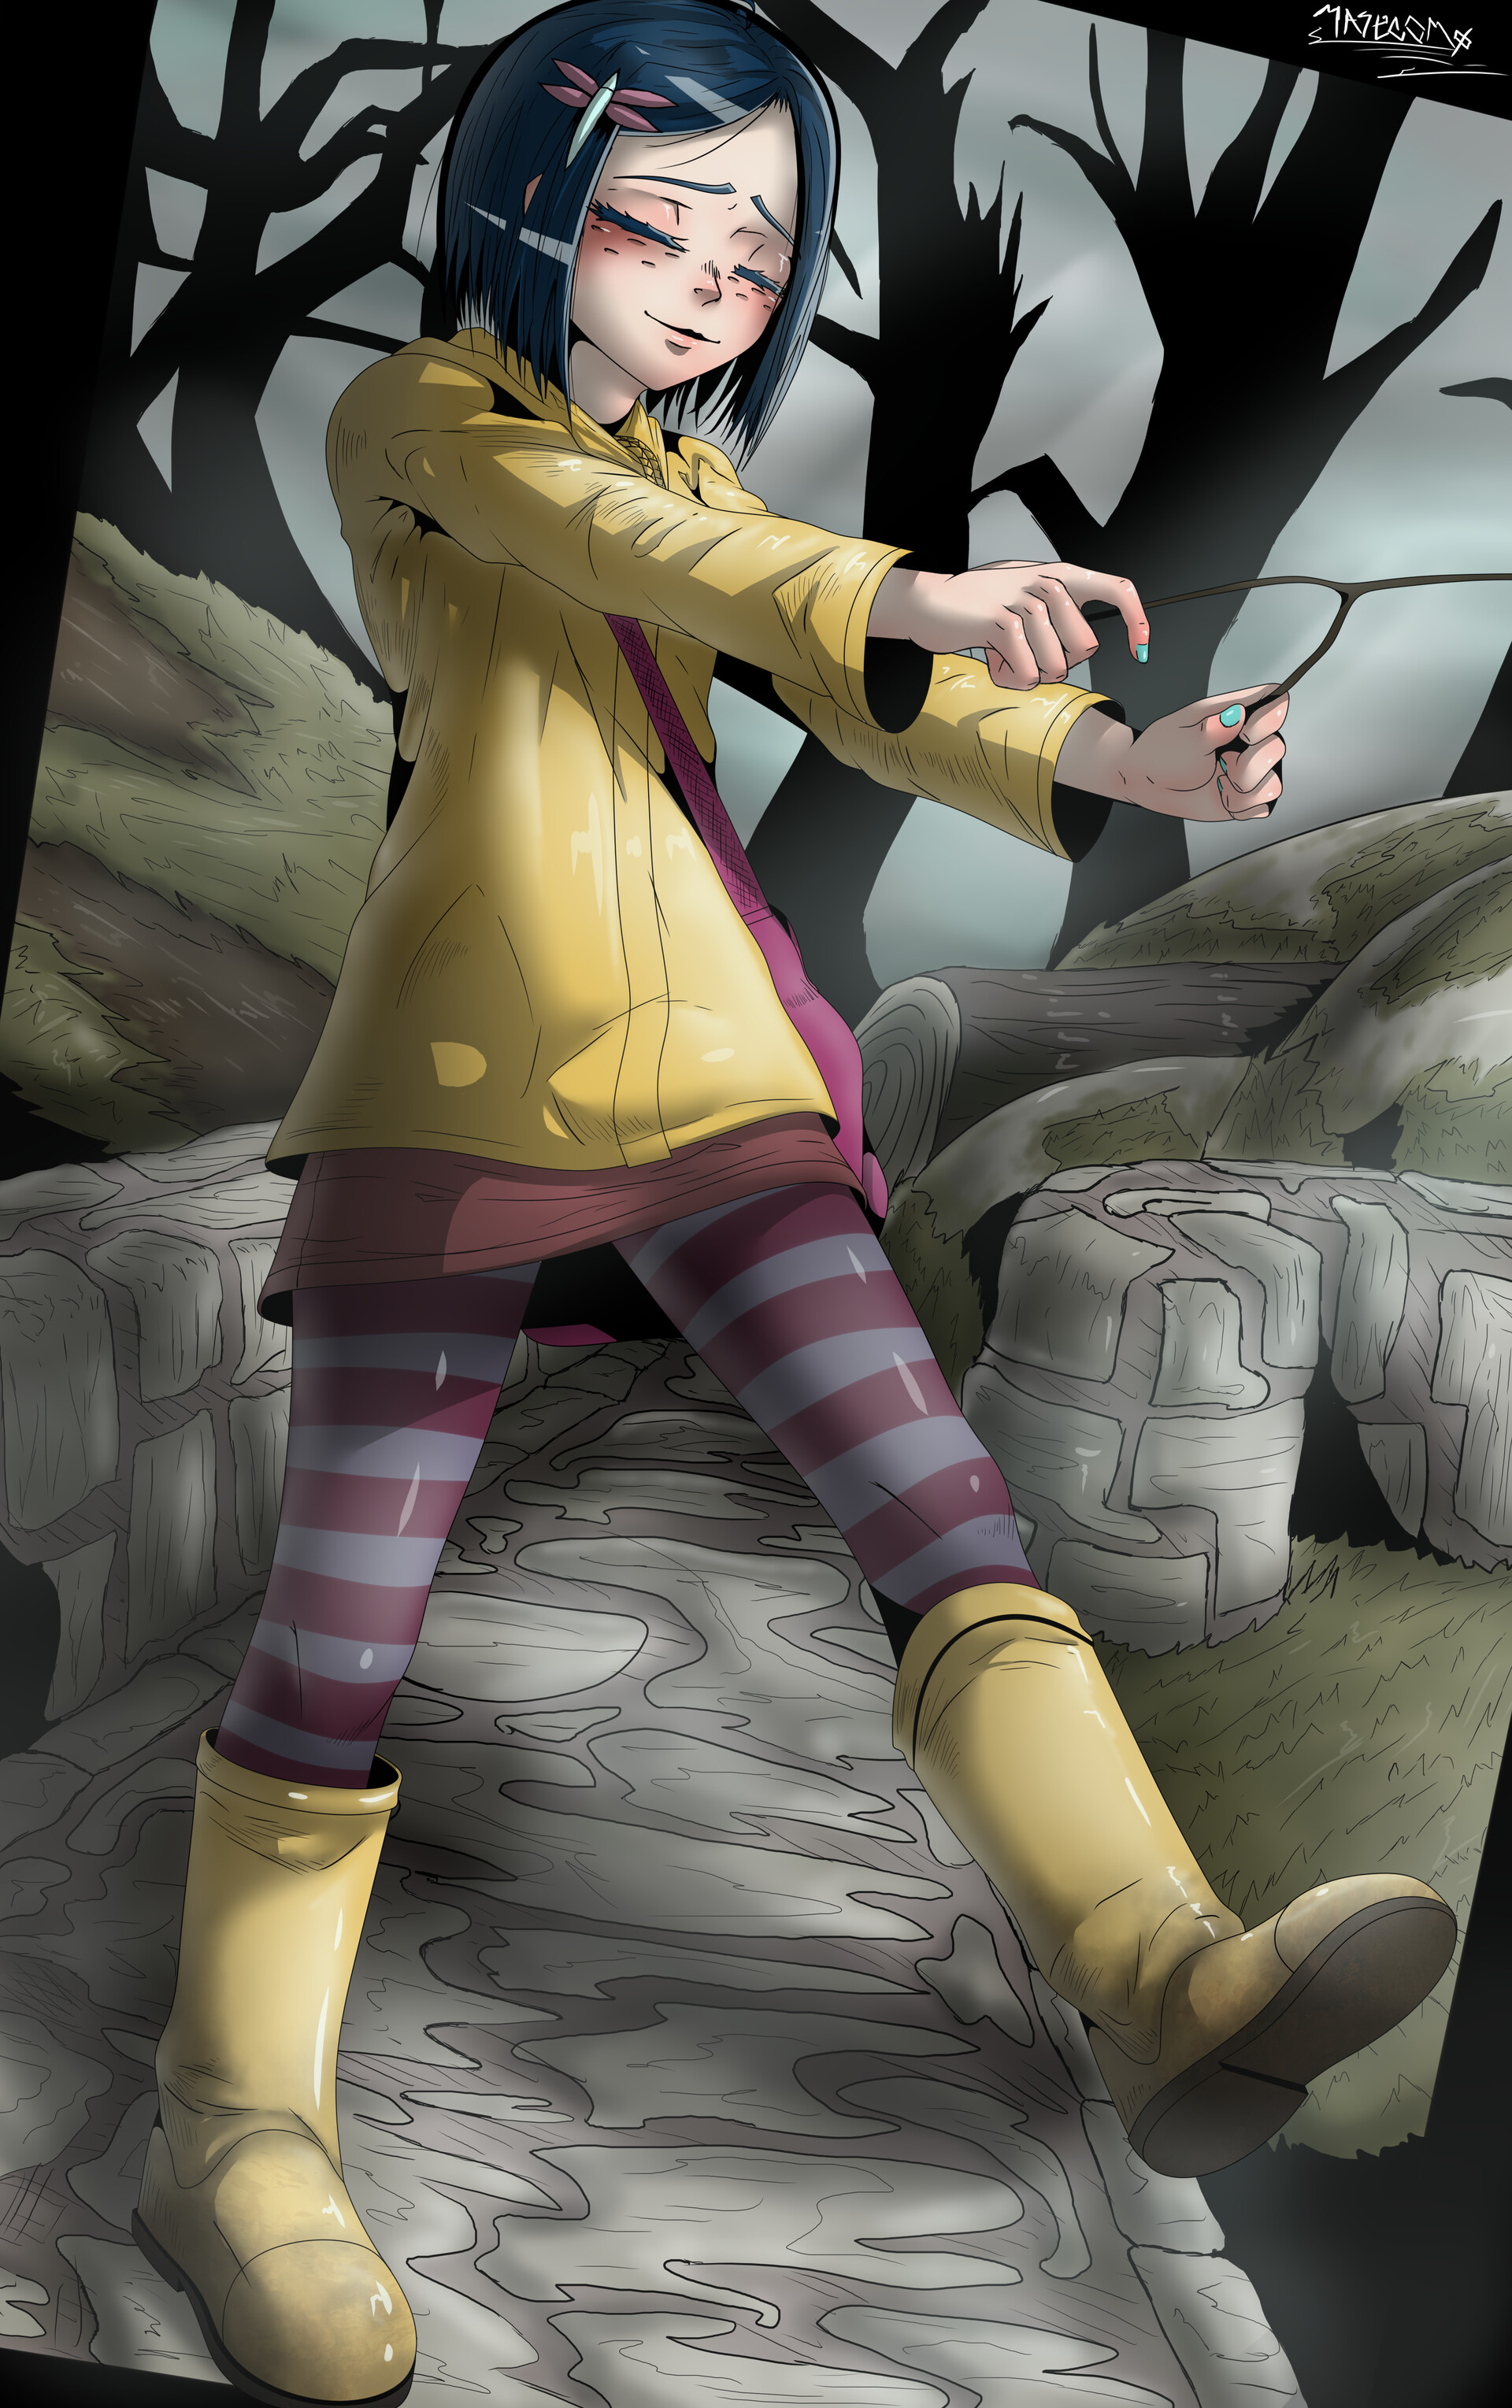 Evil Buttons: Anime-style Coraline